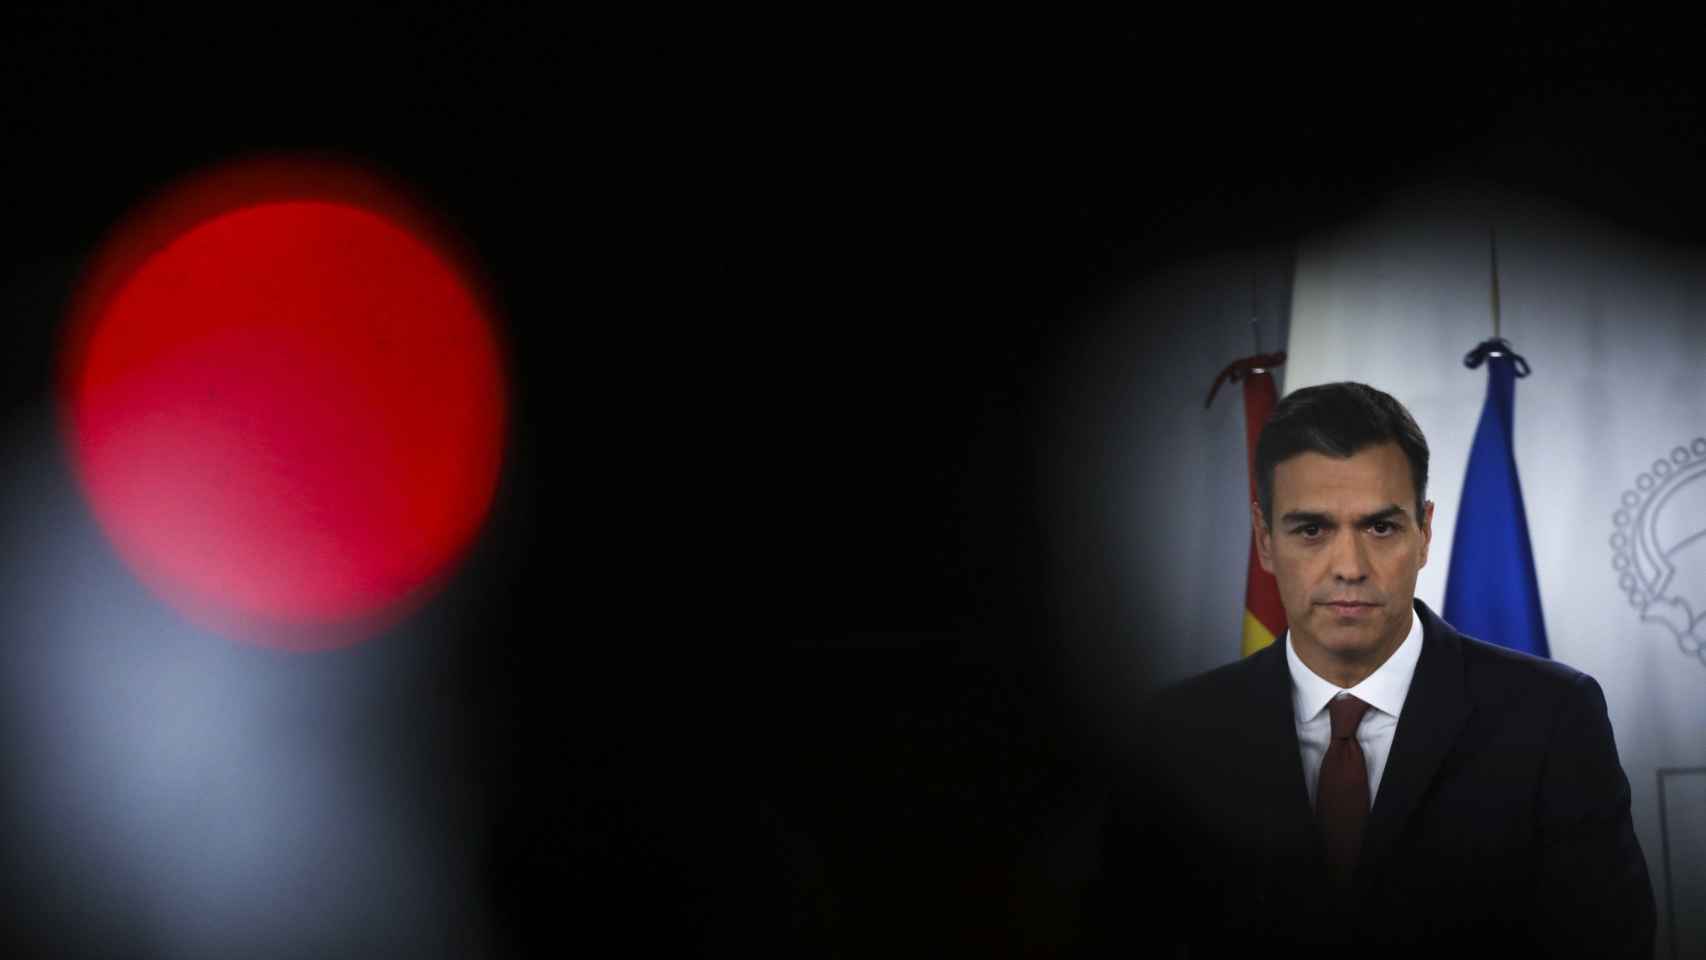 Spain's Prime Minister Pedro Sanchez listens to a question during a news conference at the Moncloa Palace in Madrid